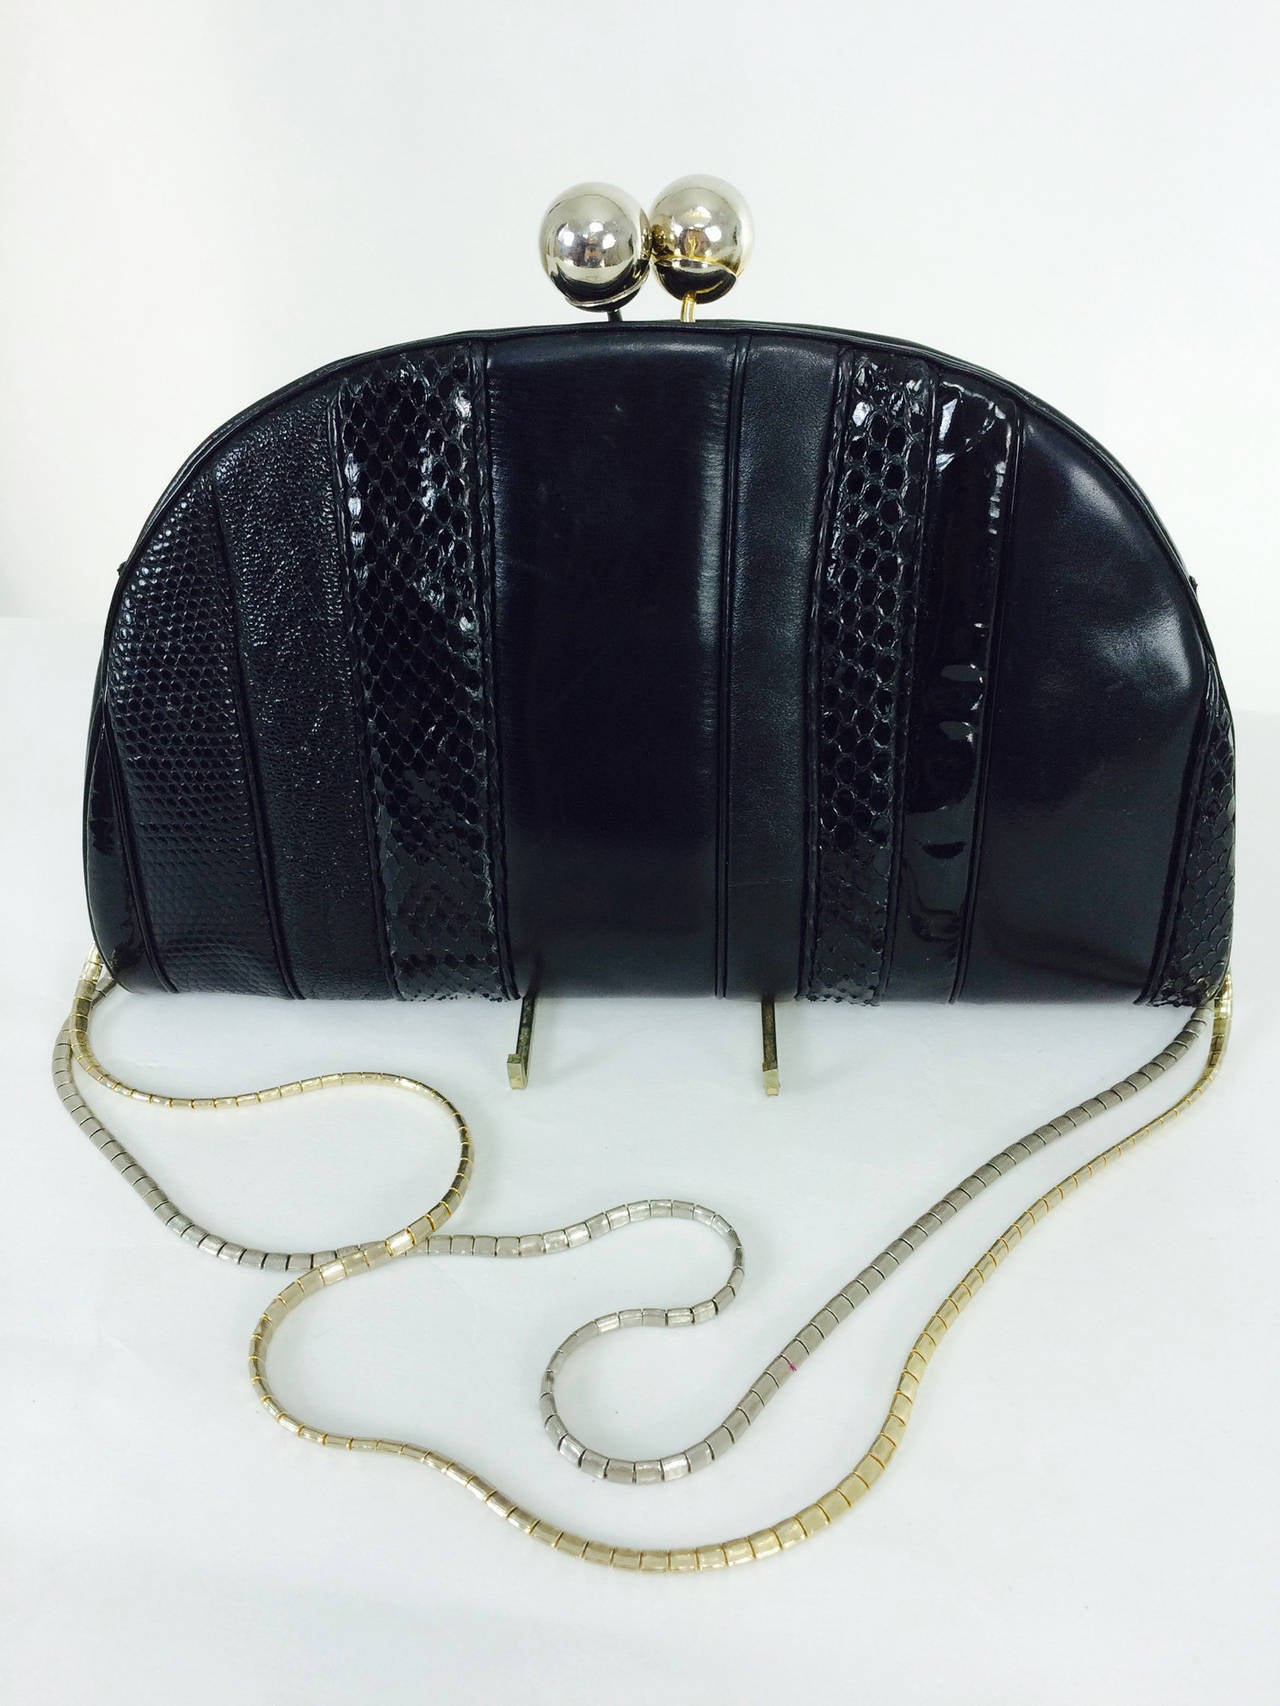 Judith Leiber black leather & snakeskin shoulder bag 1980s...Half moon shaped bag has panels of patent leather, glazed python, black lizard and mate black leather...The bag closes with two large silver balls...there is a gold and silver chain